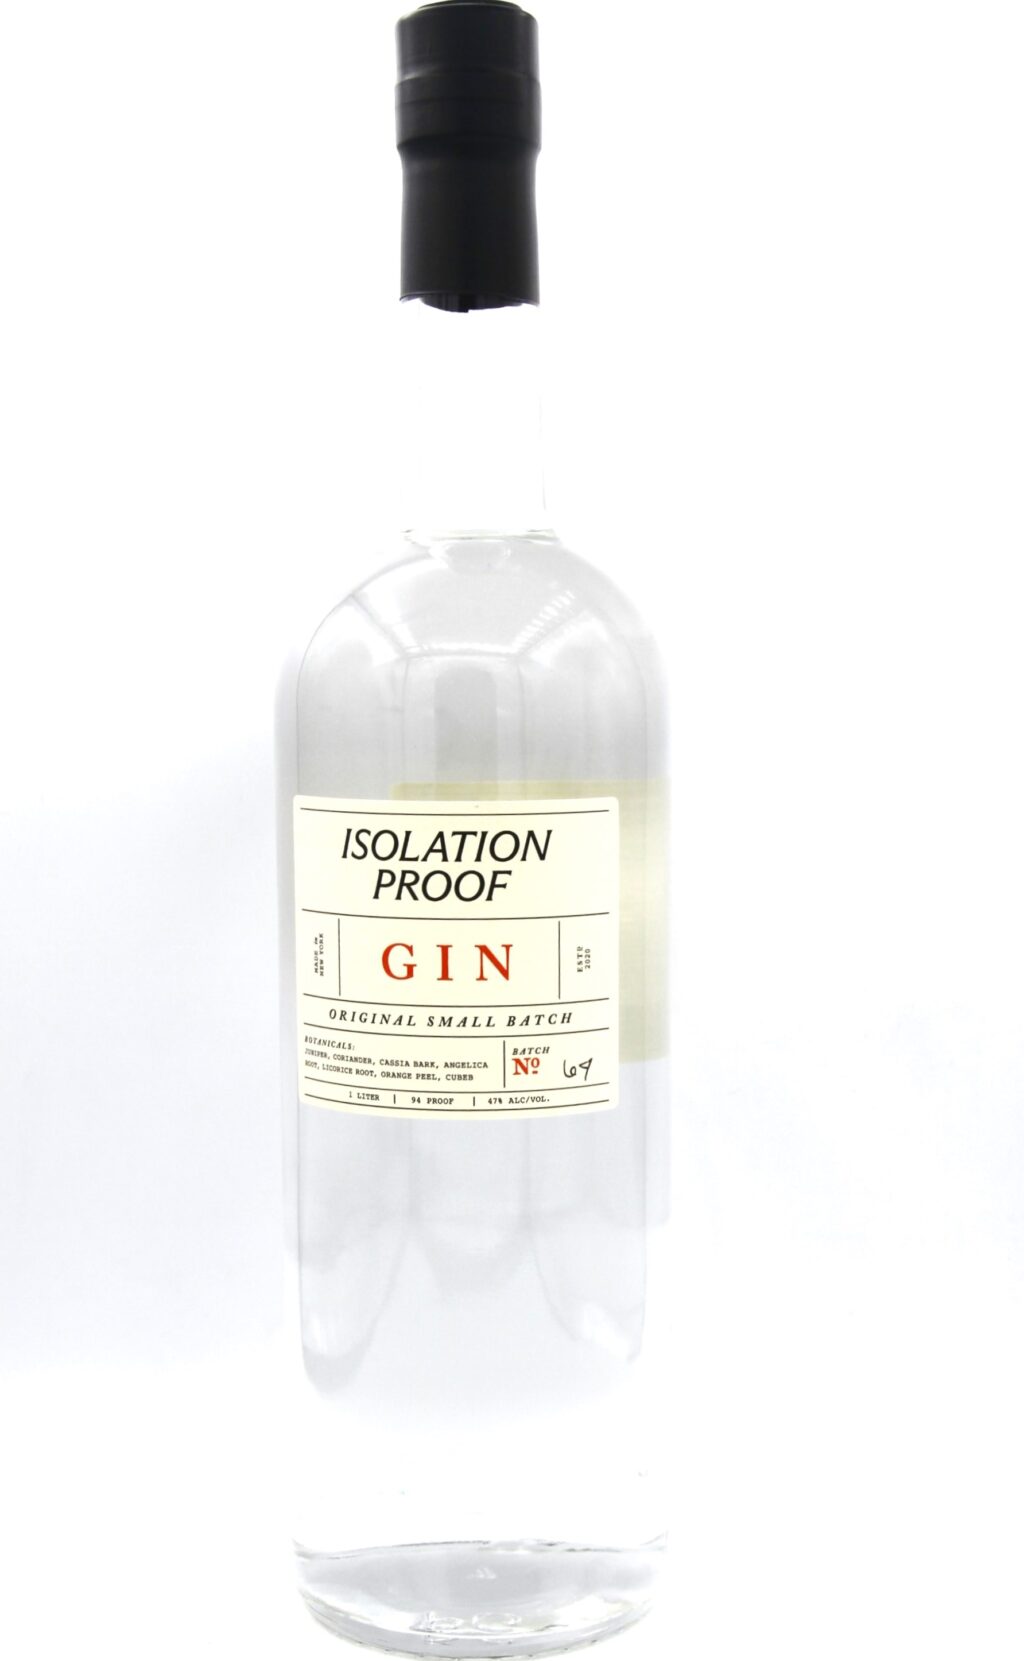 Isolation Proof Gin 1 liter